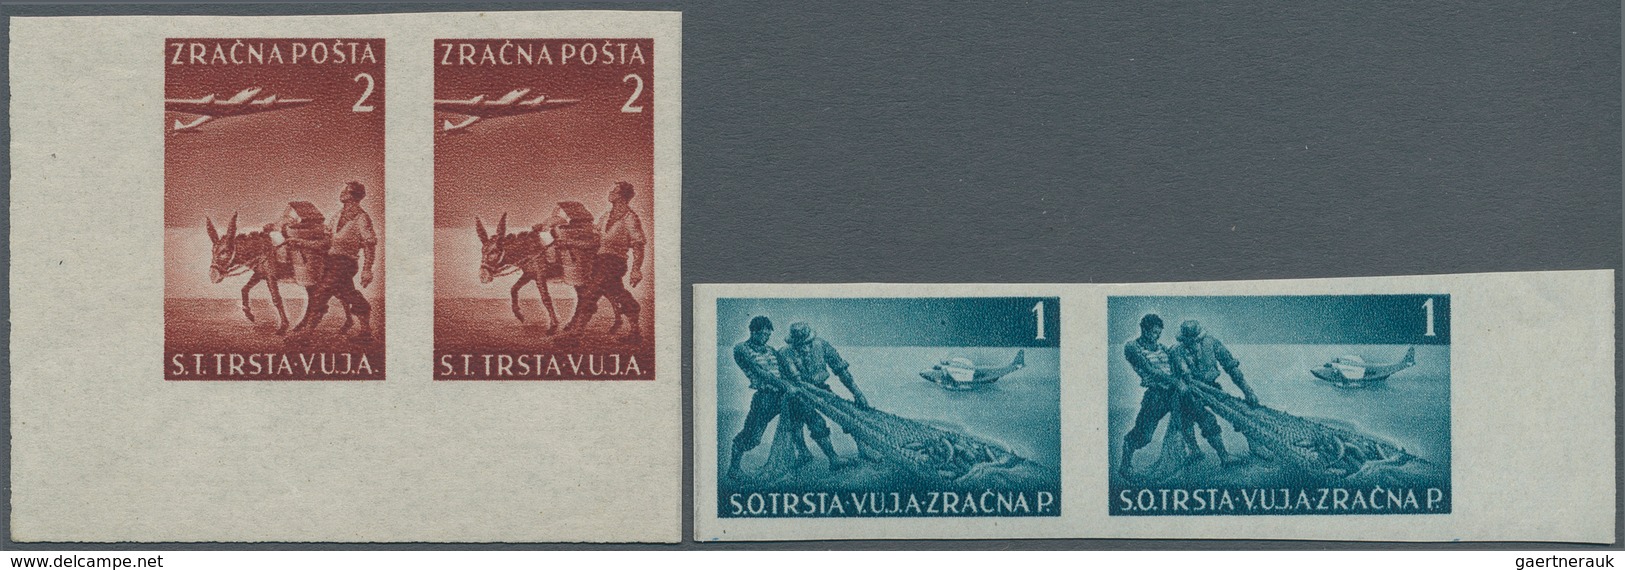 Triest - Zone B: 1949, 1 And 2 Lj Airmail Stamps Mnh As Imperforated Margin Pairs- Sassone 2.500,- - Neufs